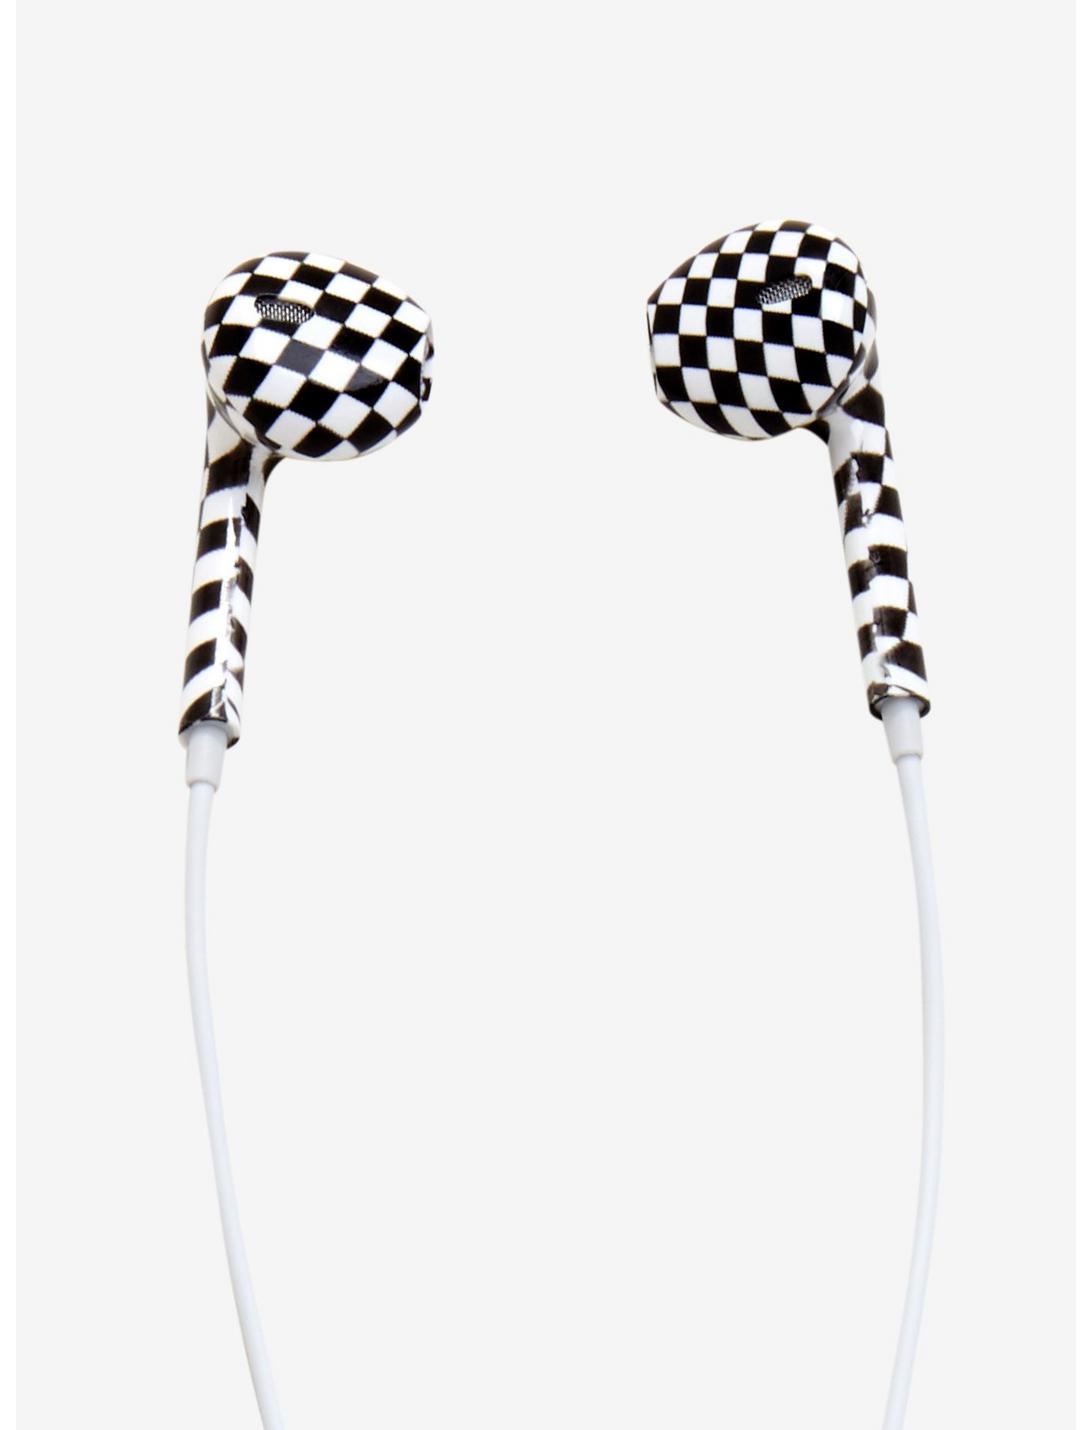 Black & White Checkered Earbuds, , hi-res